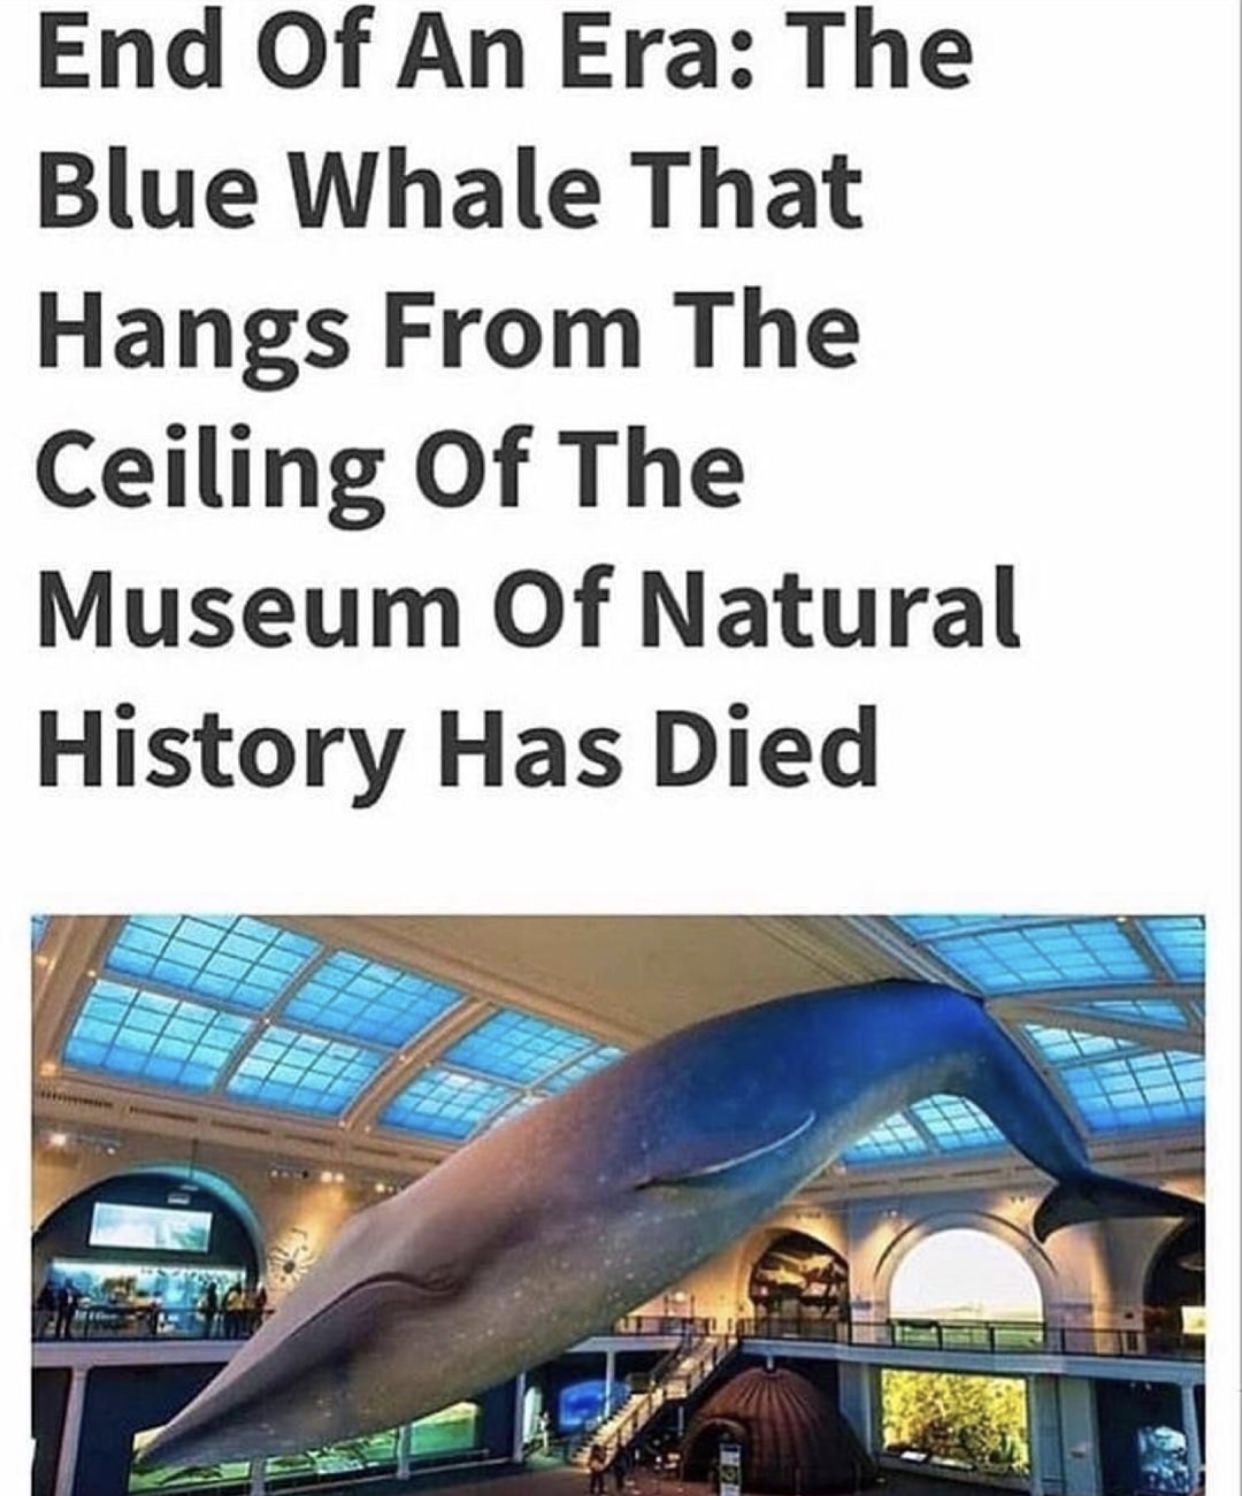 american museum of natural history - End Of An Era The Blue Whale That Hangs From The Ceiling Of The Museum of Natural History Has Died